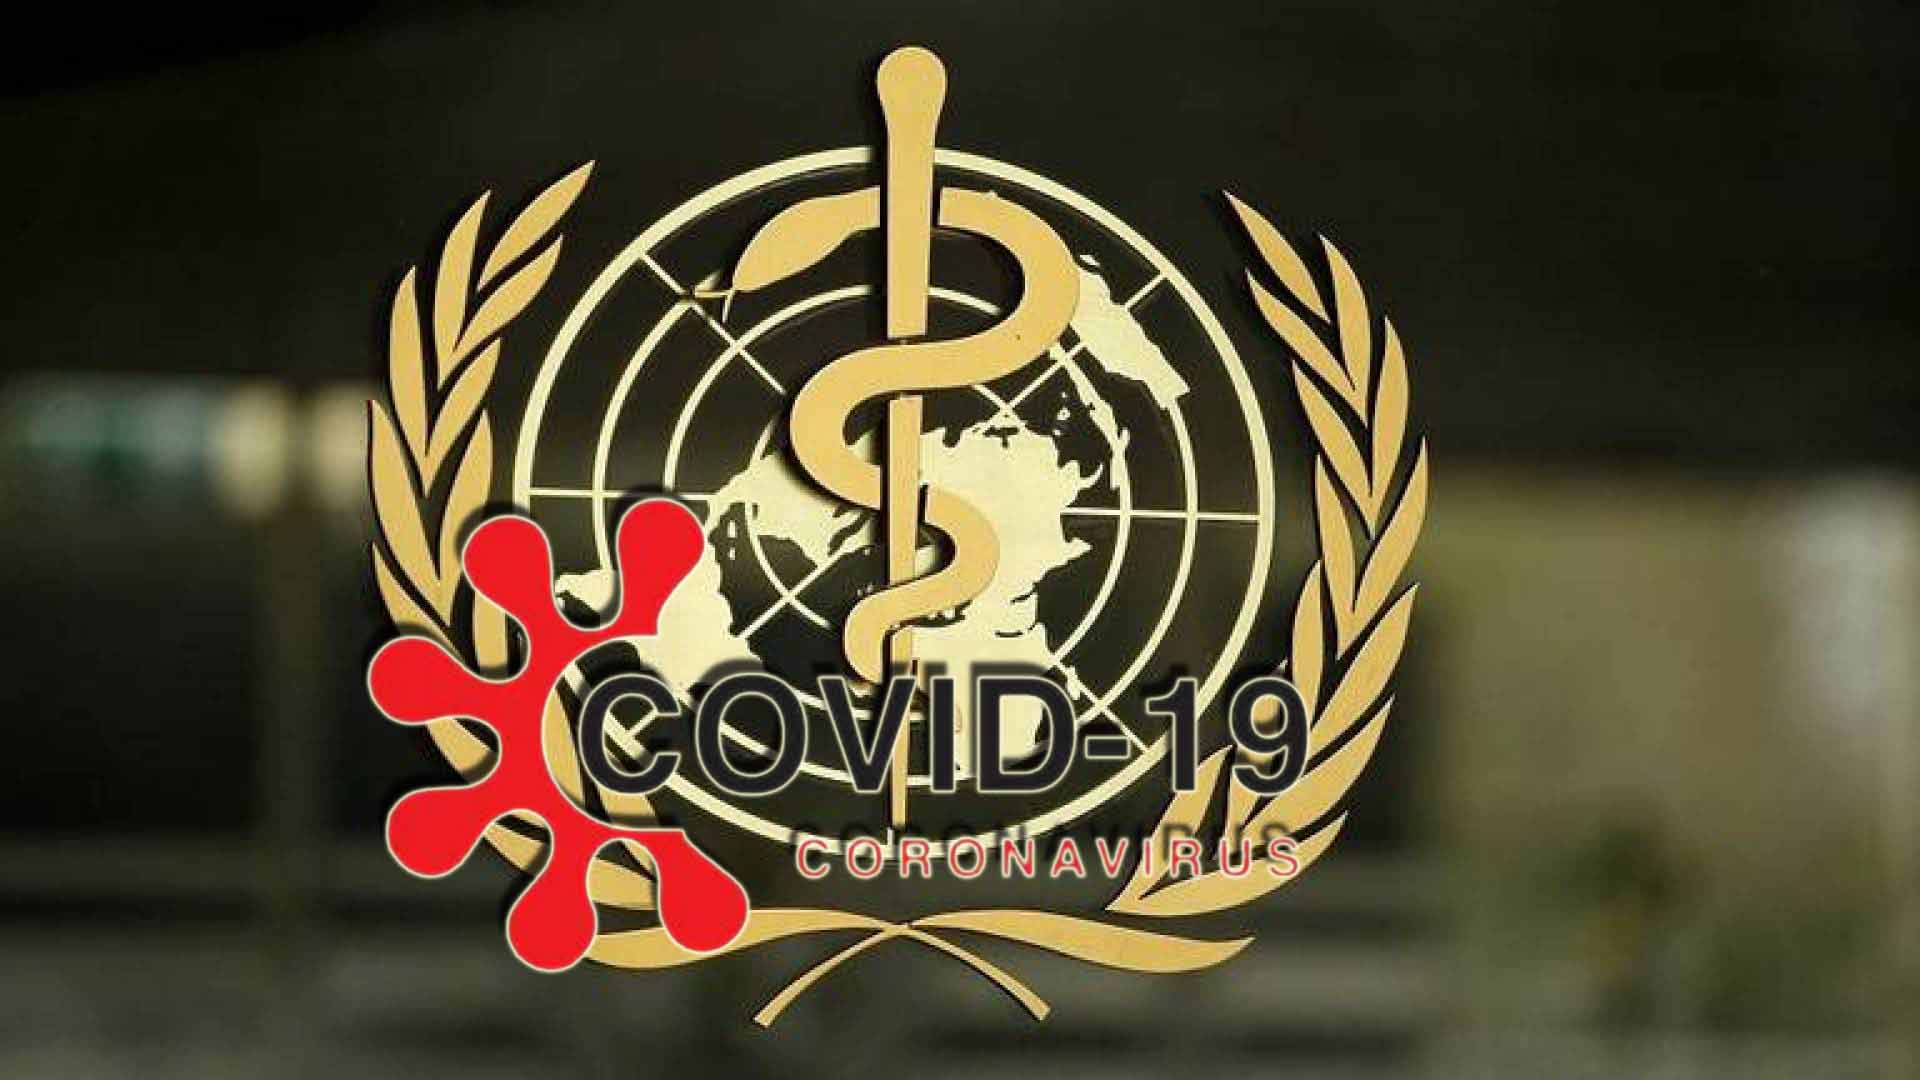 Indian COVID-19 strain detected in 53 countries